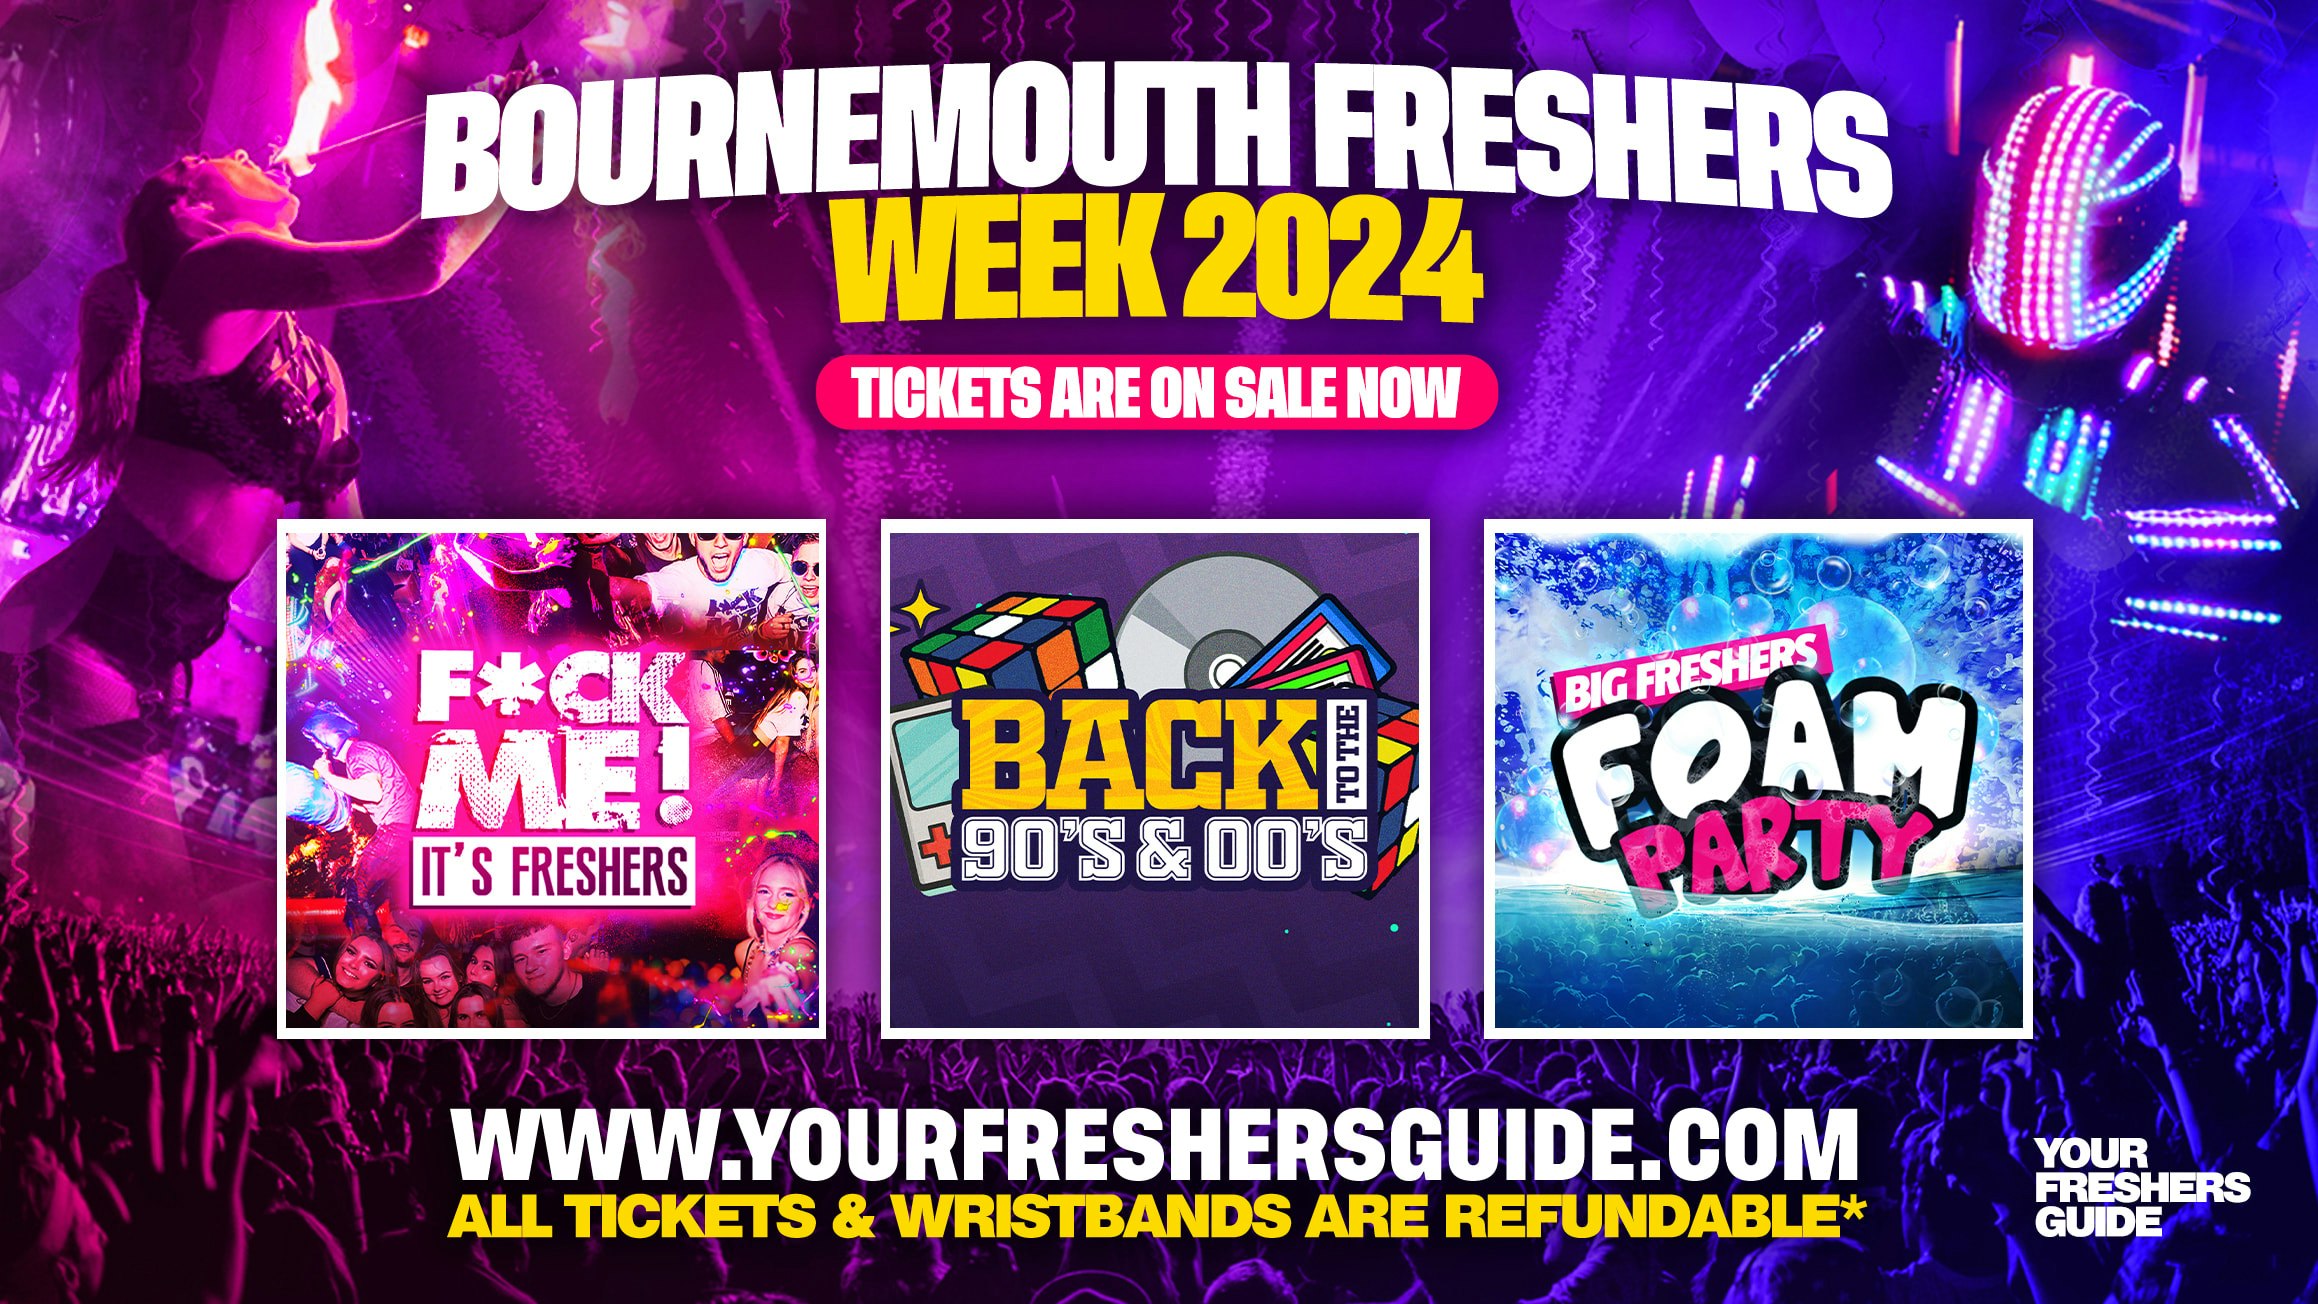 Bournemouth Freshers Week Wristband 2024 – The Biggest Events of Bournemouth Freshers 2024 🎉 – FREE Queue Jump With Every Ticket 💃 – TODAY ONLY!